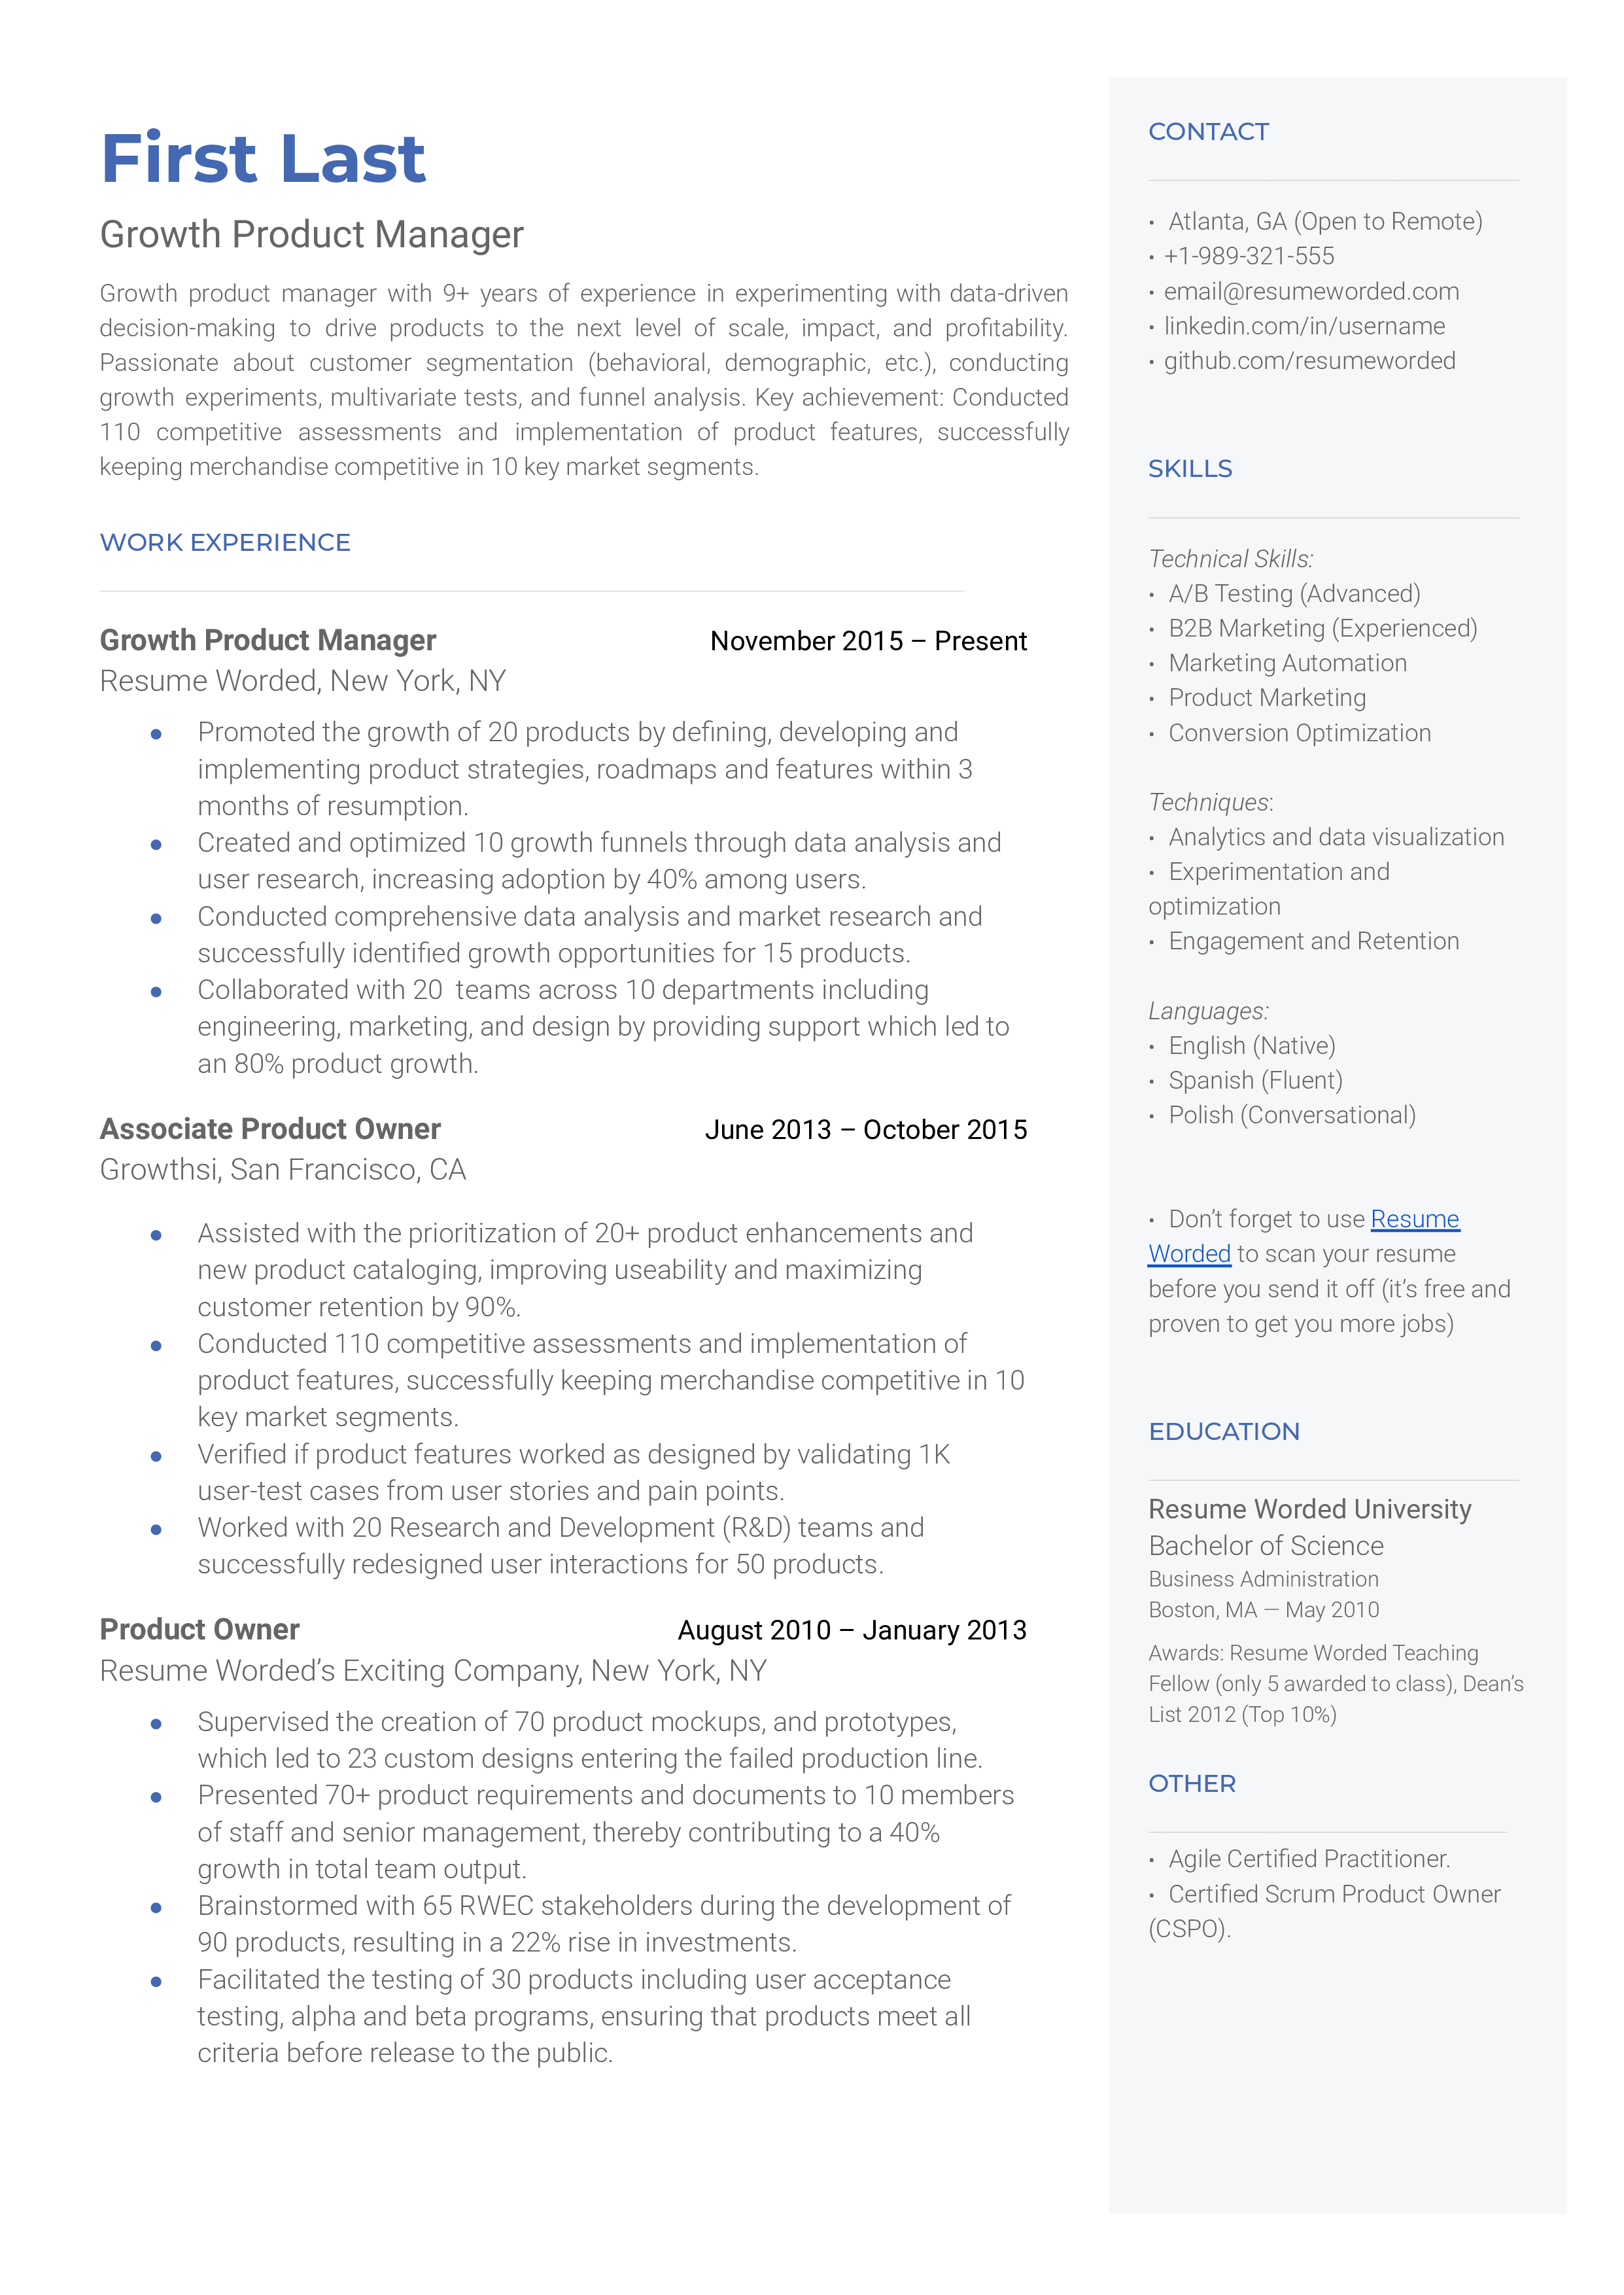 Growth Product Manager Resume Sample